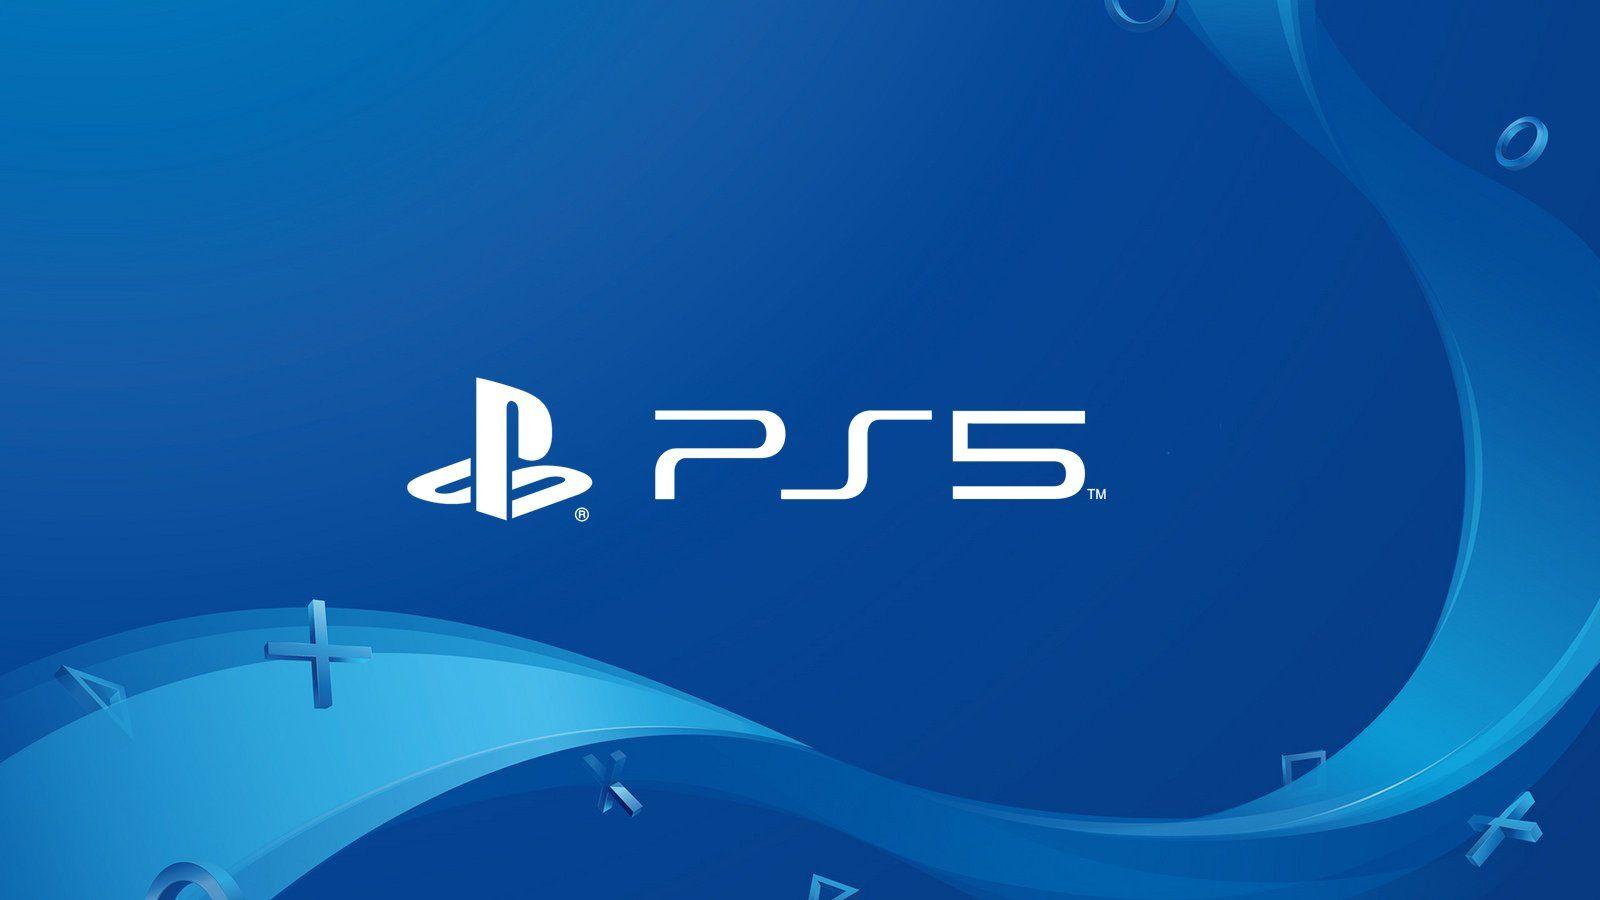 PS5 Wallpapers - Top Free PS5 Backgrounds - WallpaperAccess